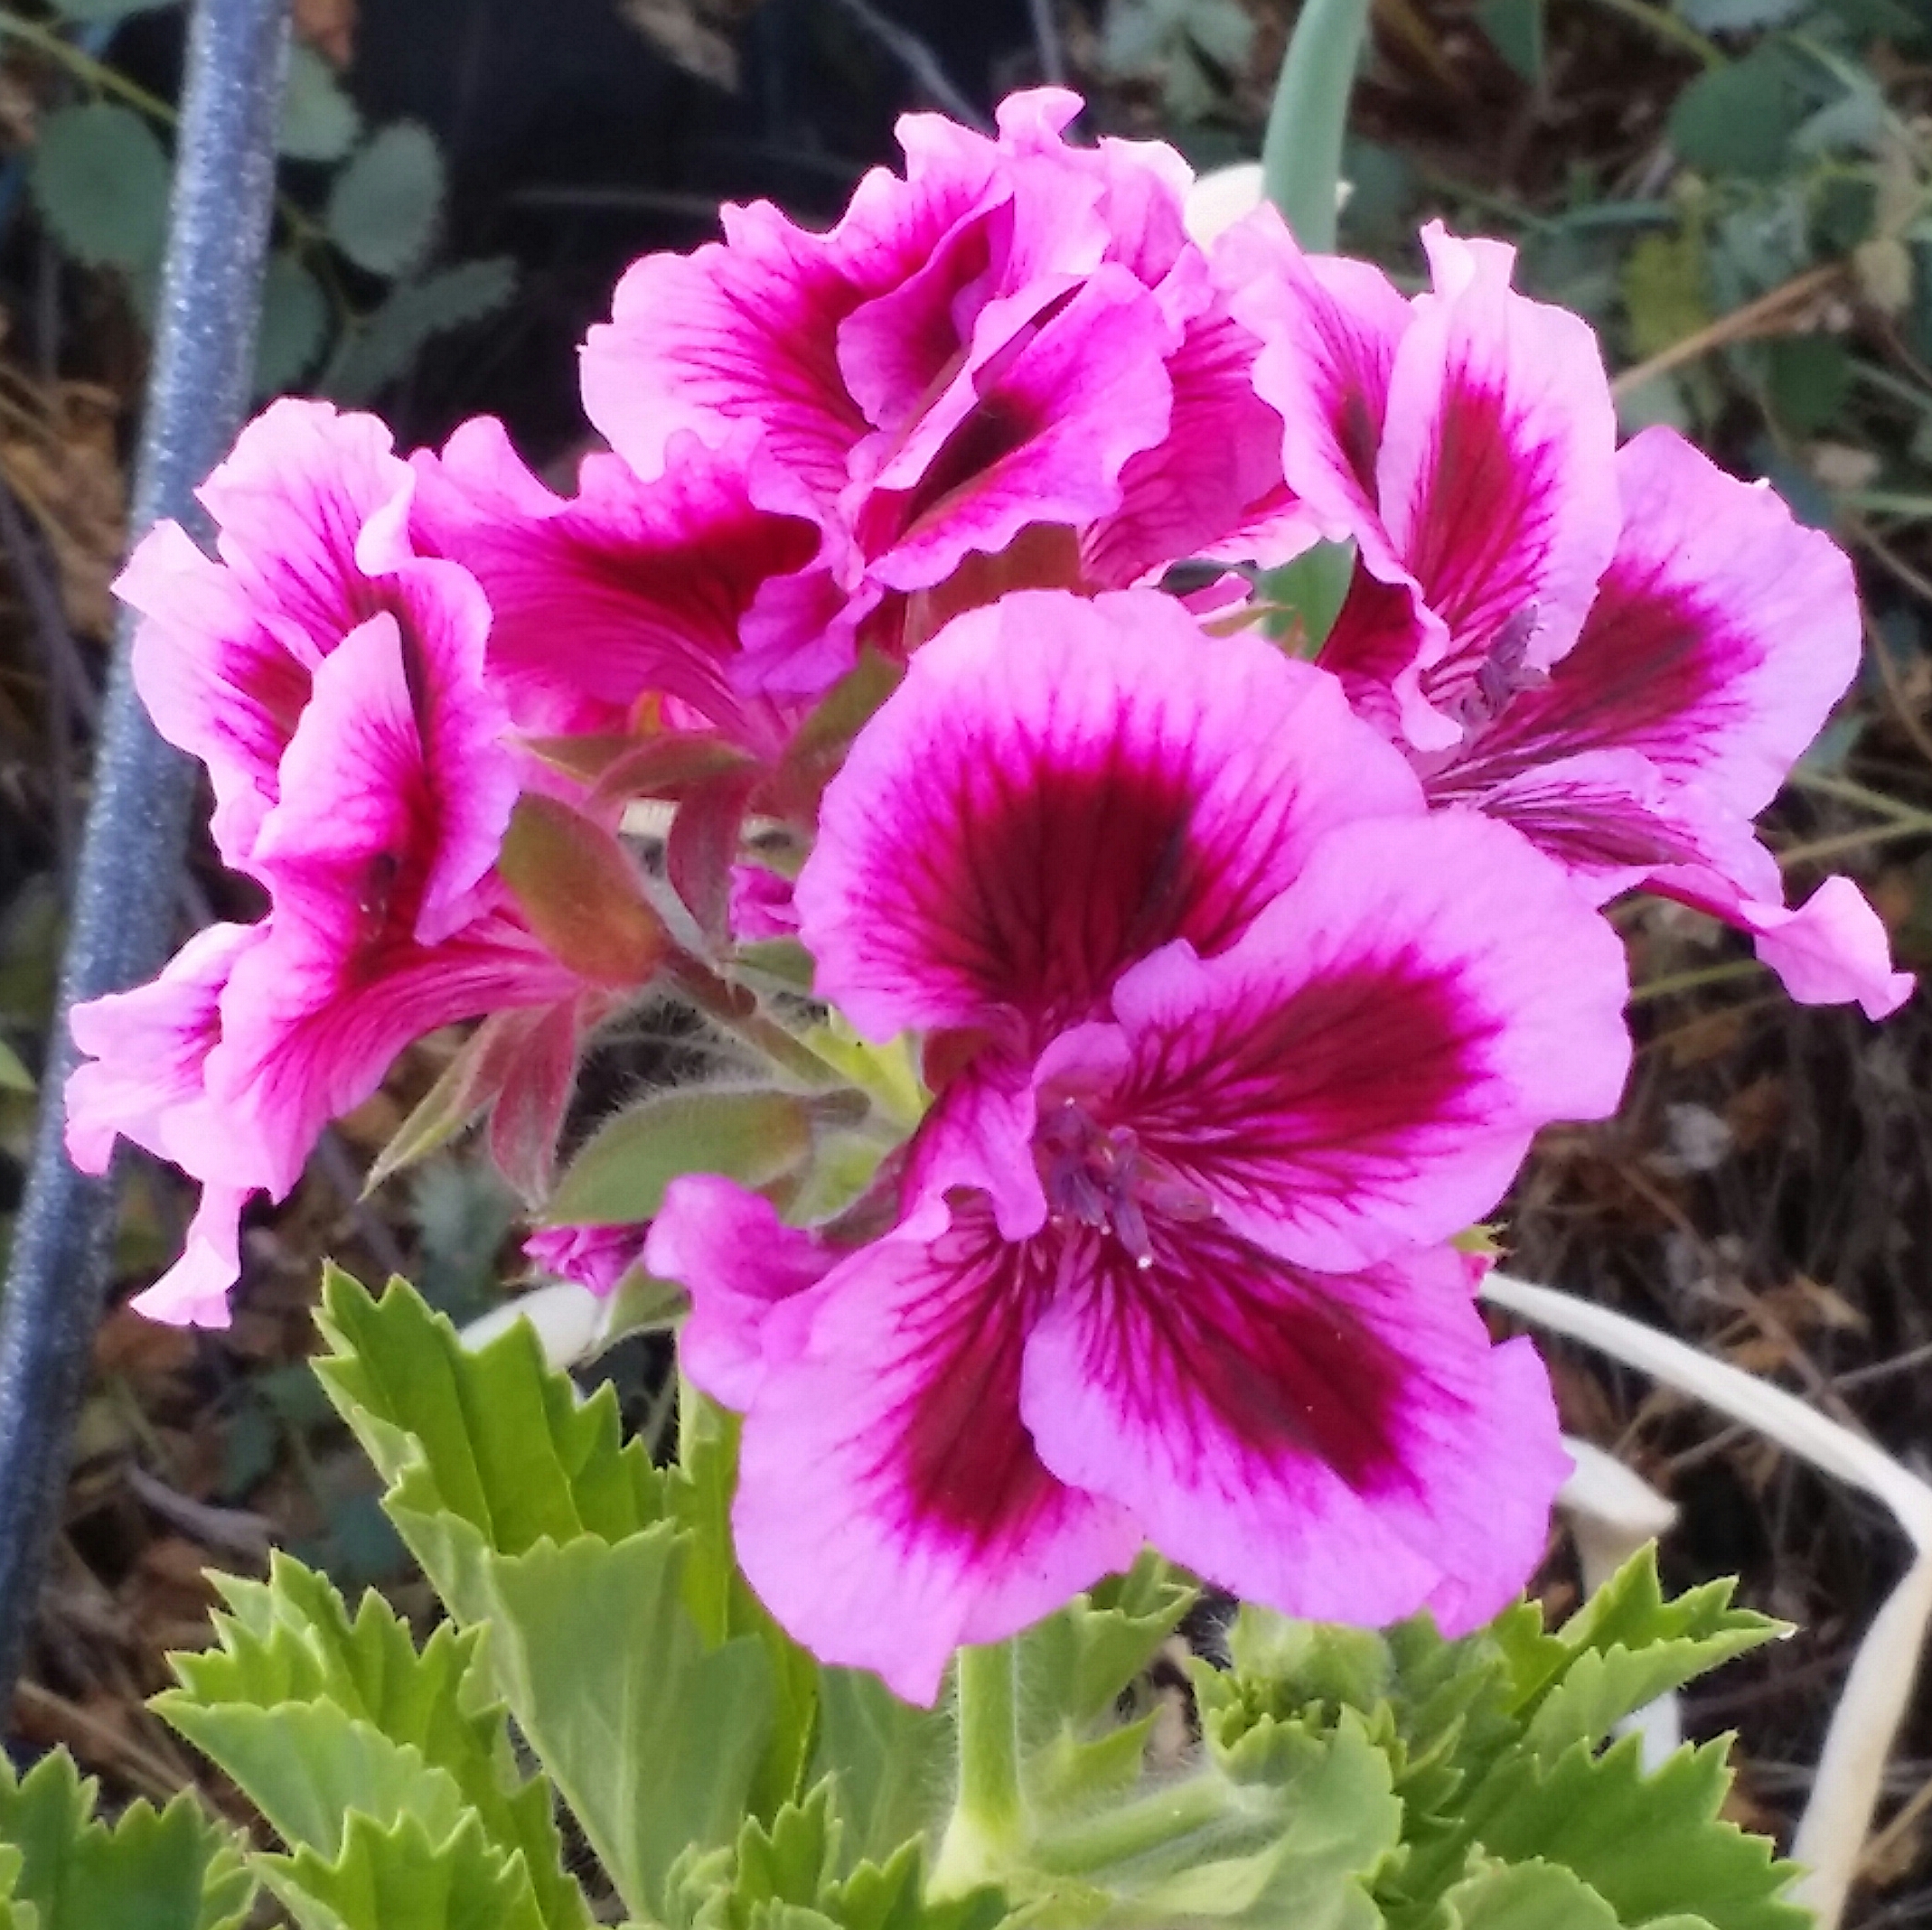 This geranium is about the only thing that is blooming outside my house this week, except for a few roses.